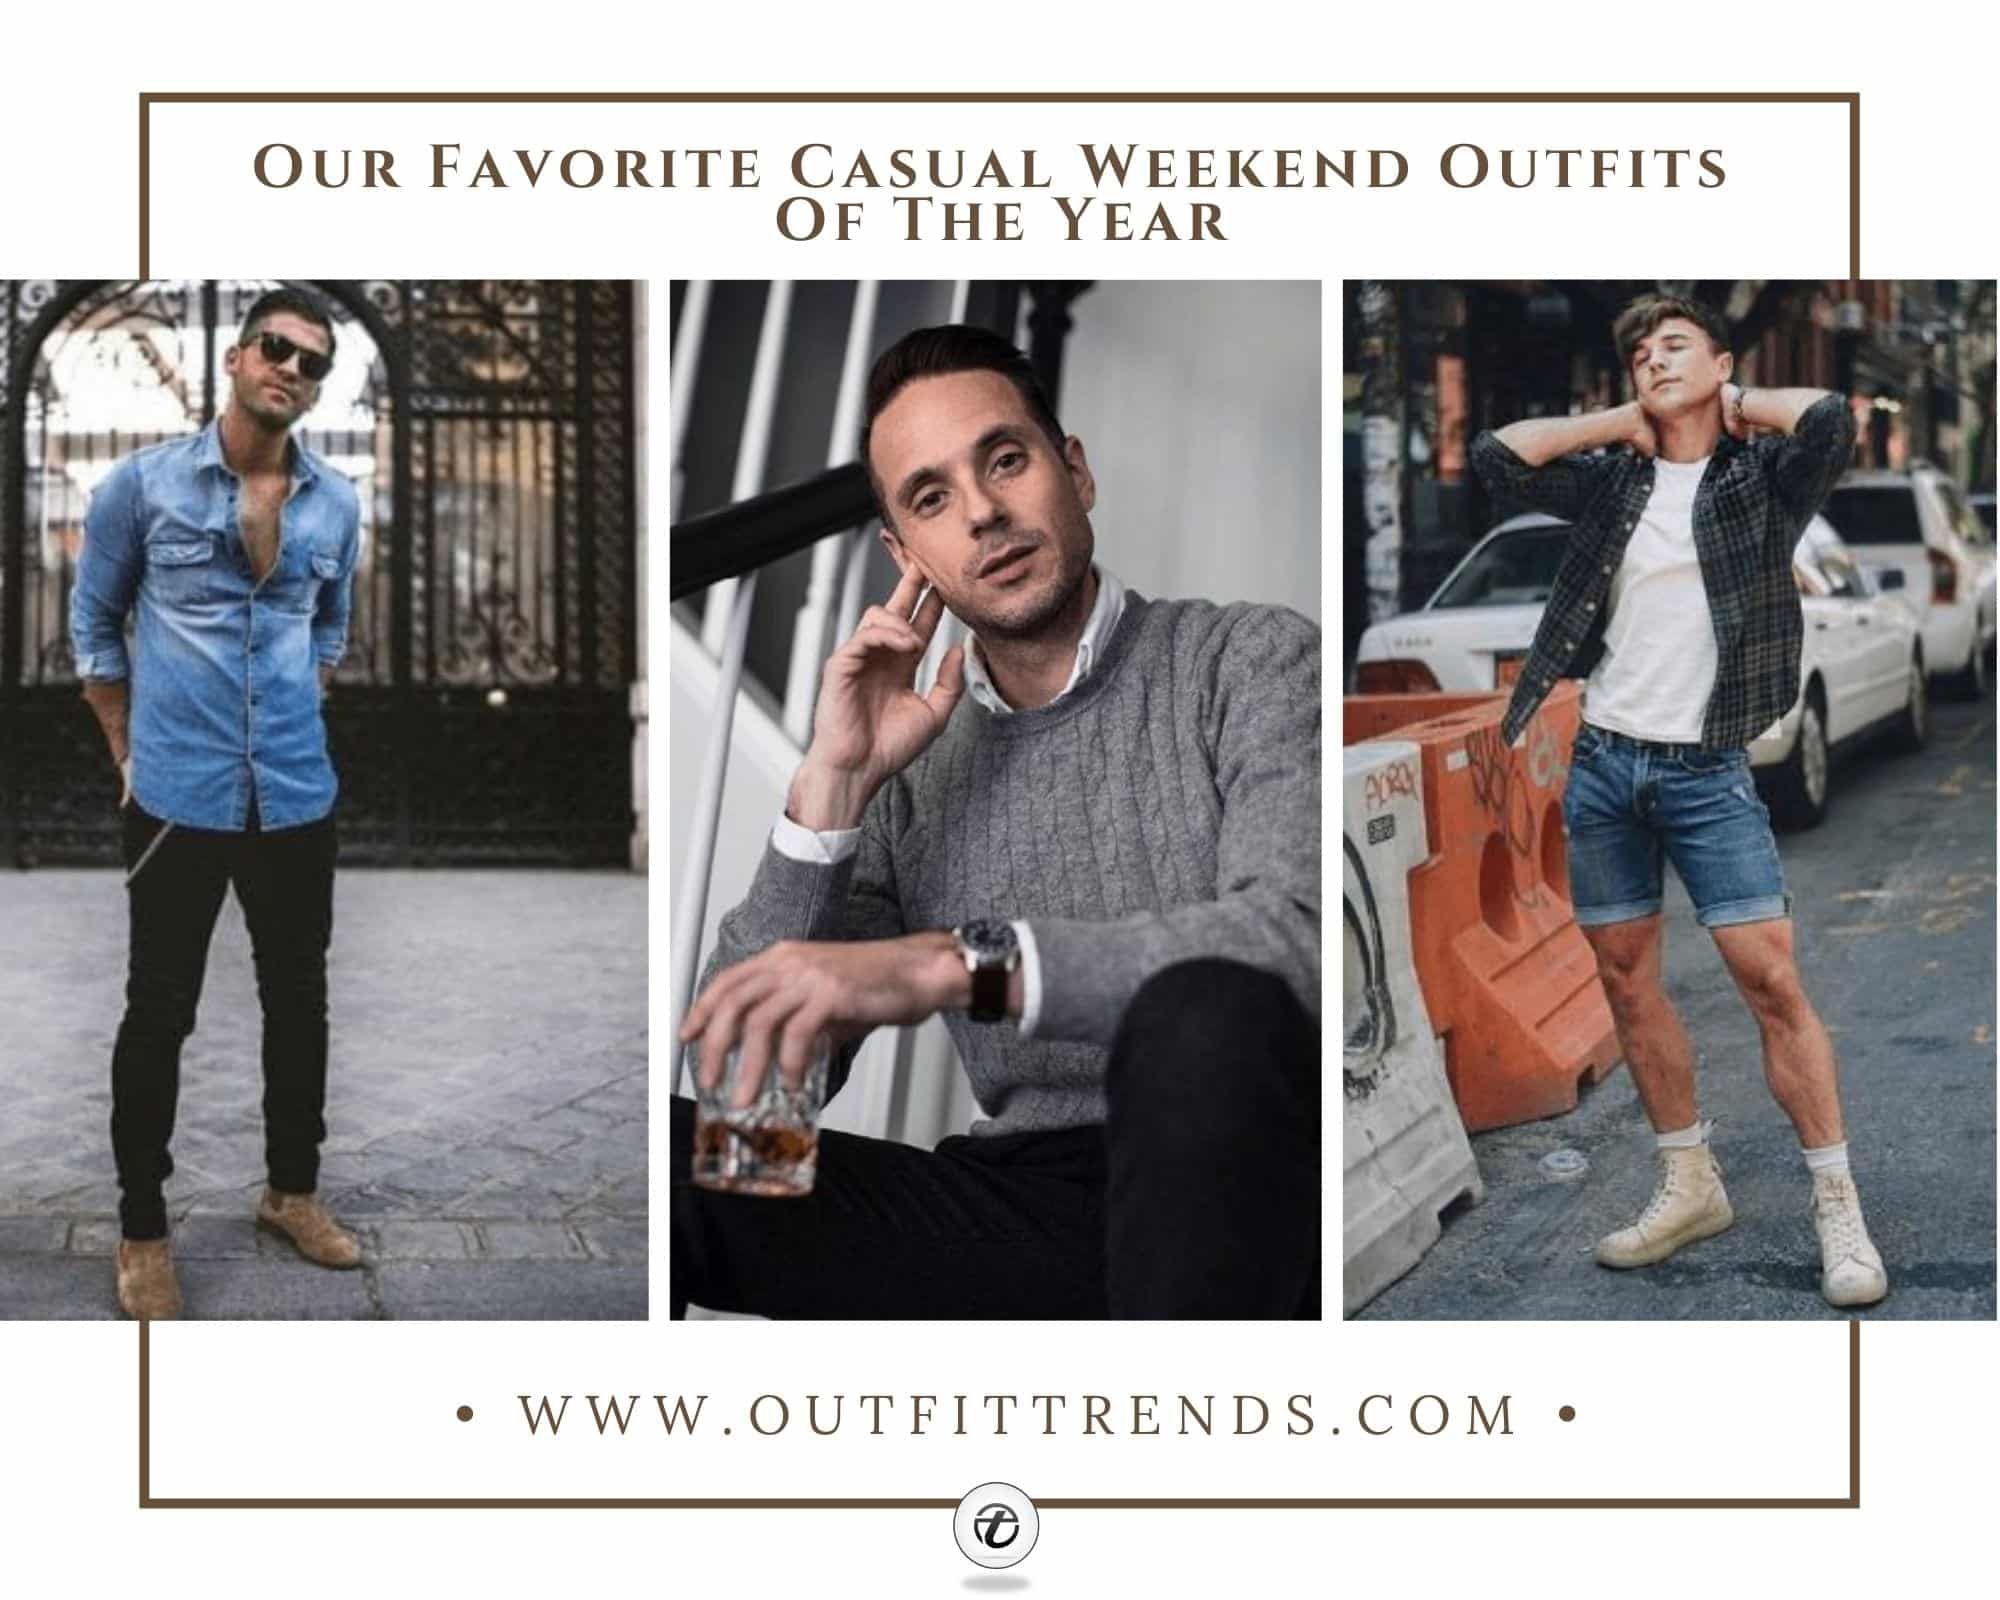 Top 20 Trending Weekend Outfits For Men To Try This Year